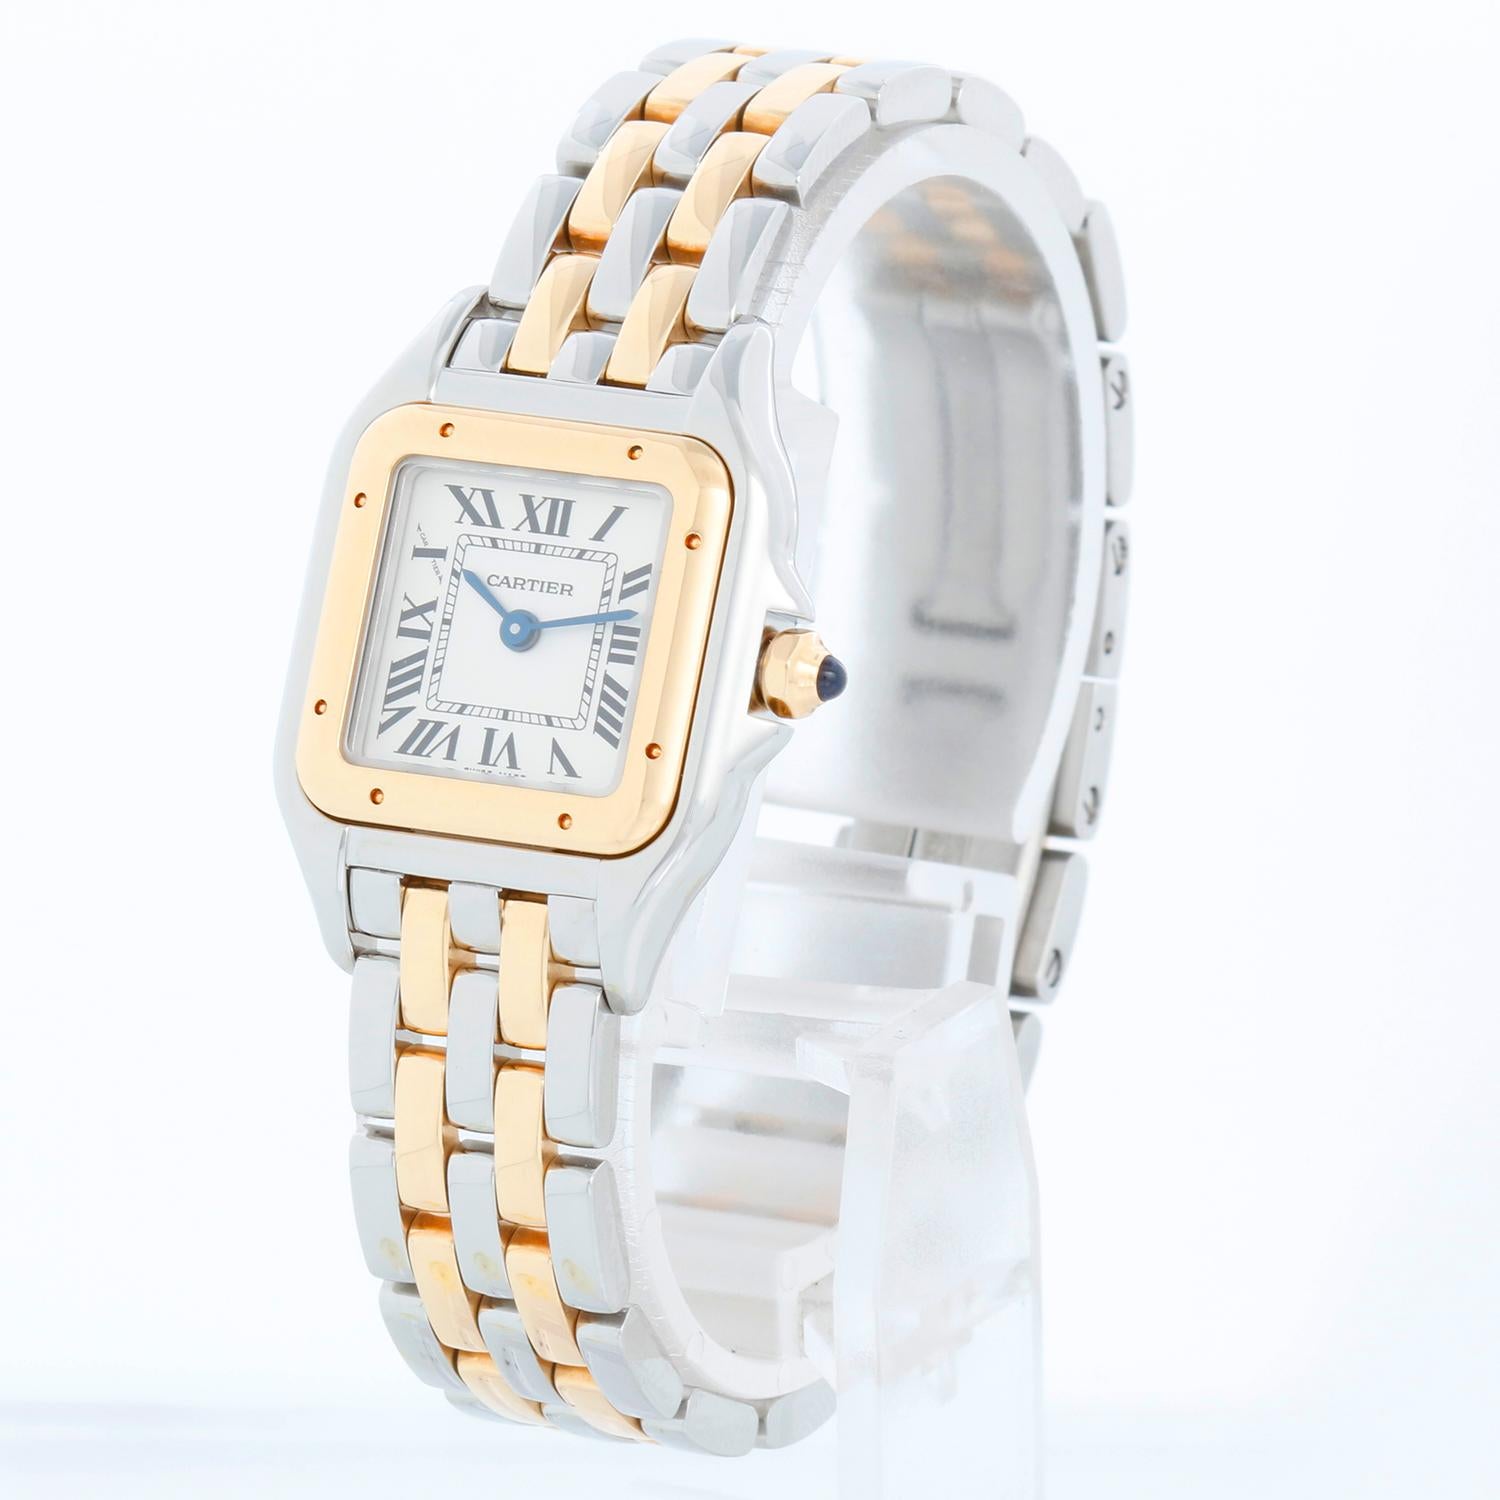 Cartier Panther Small 2-Tone Steel & Gold Panthere Watch 4023 - Quartz. Stainless steel case with 18k yellow gold bezel (22mm x 30mm). Silver colored dial with black Roman numerals. Stainless steel Panthere bracelet with 2-row of 18k yellow gold